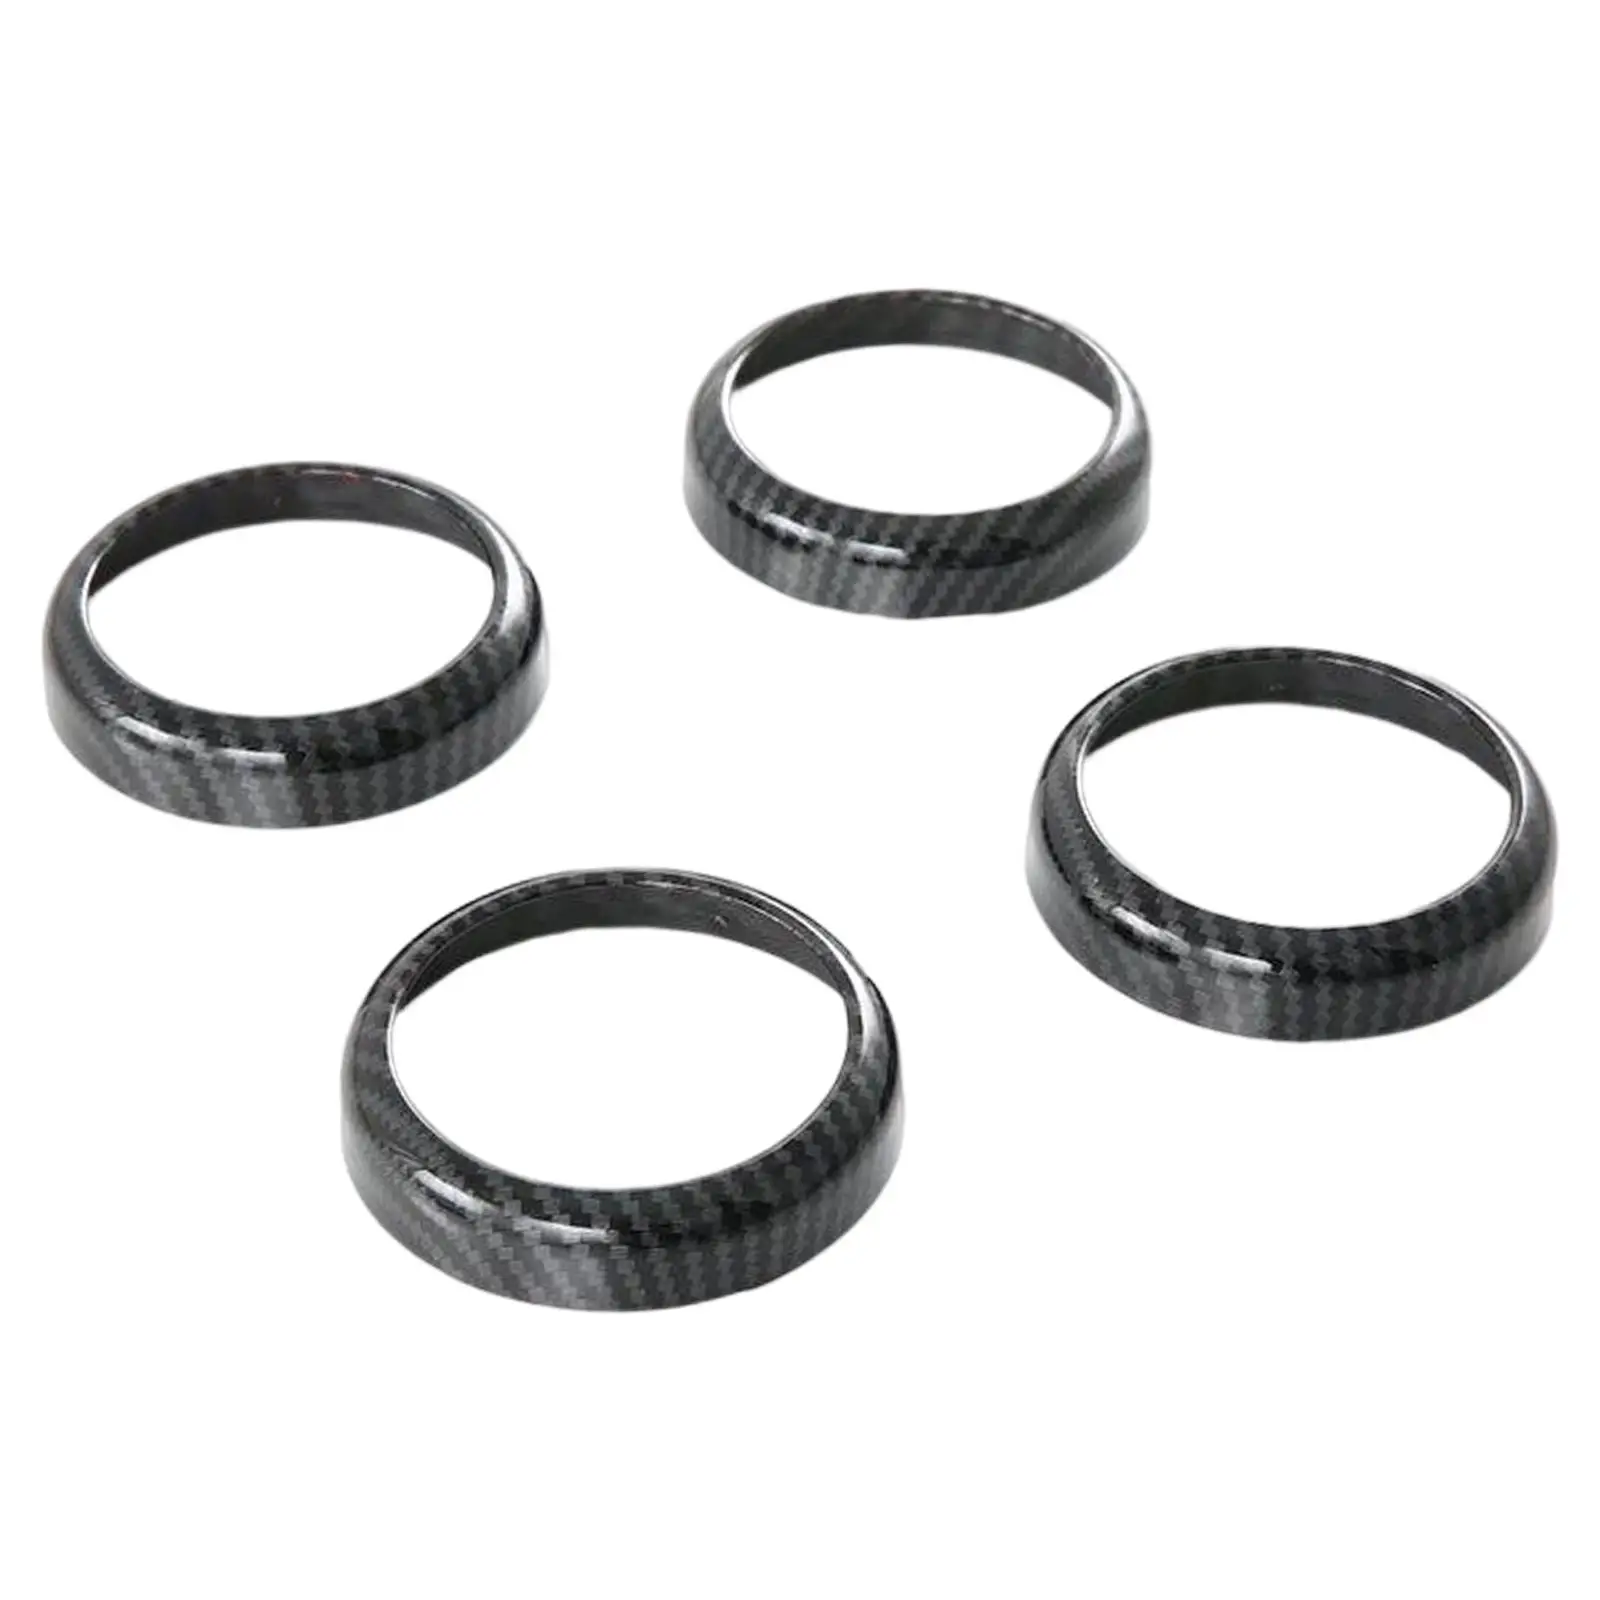 4Pcs Door Speaker Rings Stickers Decals for Byd Atto 3 Yuan Plus Car Accessories